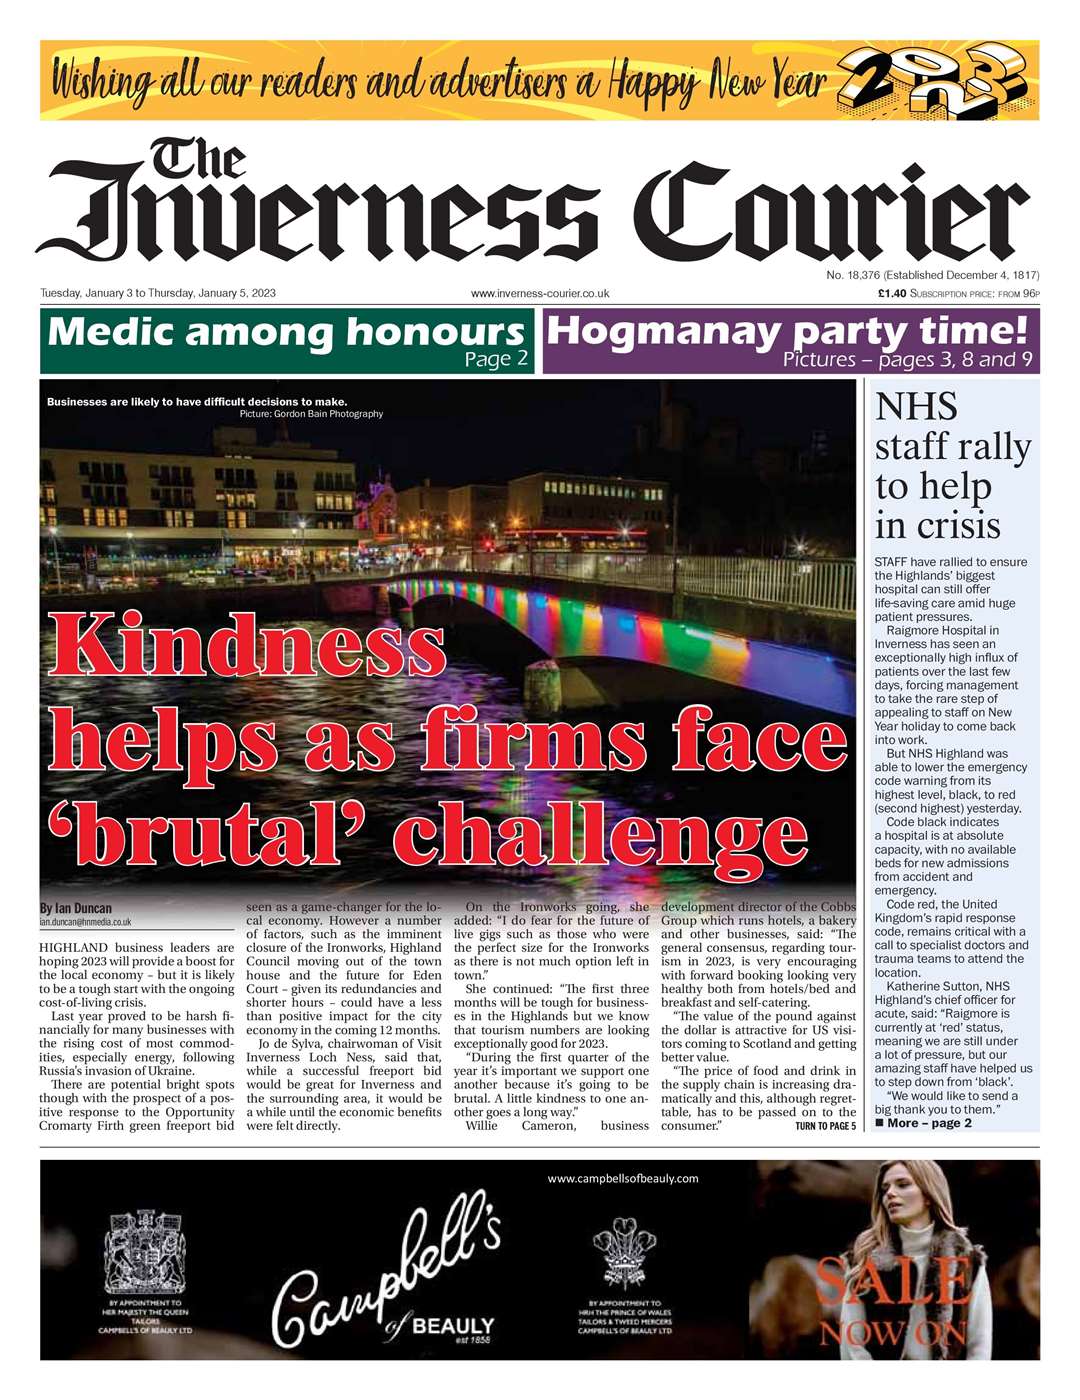 The Inverness Courier, January 3, front page.